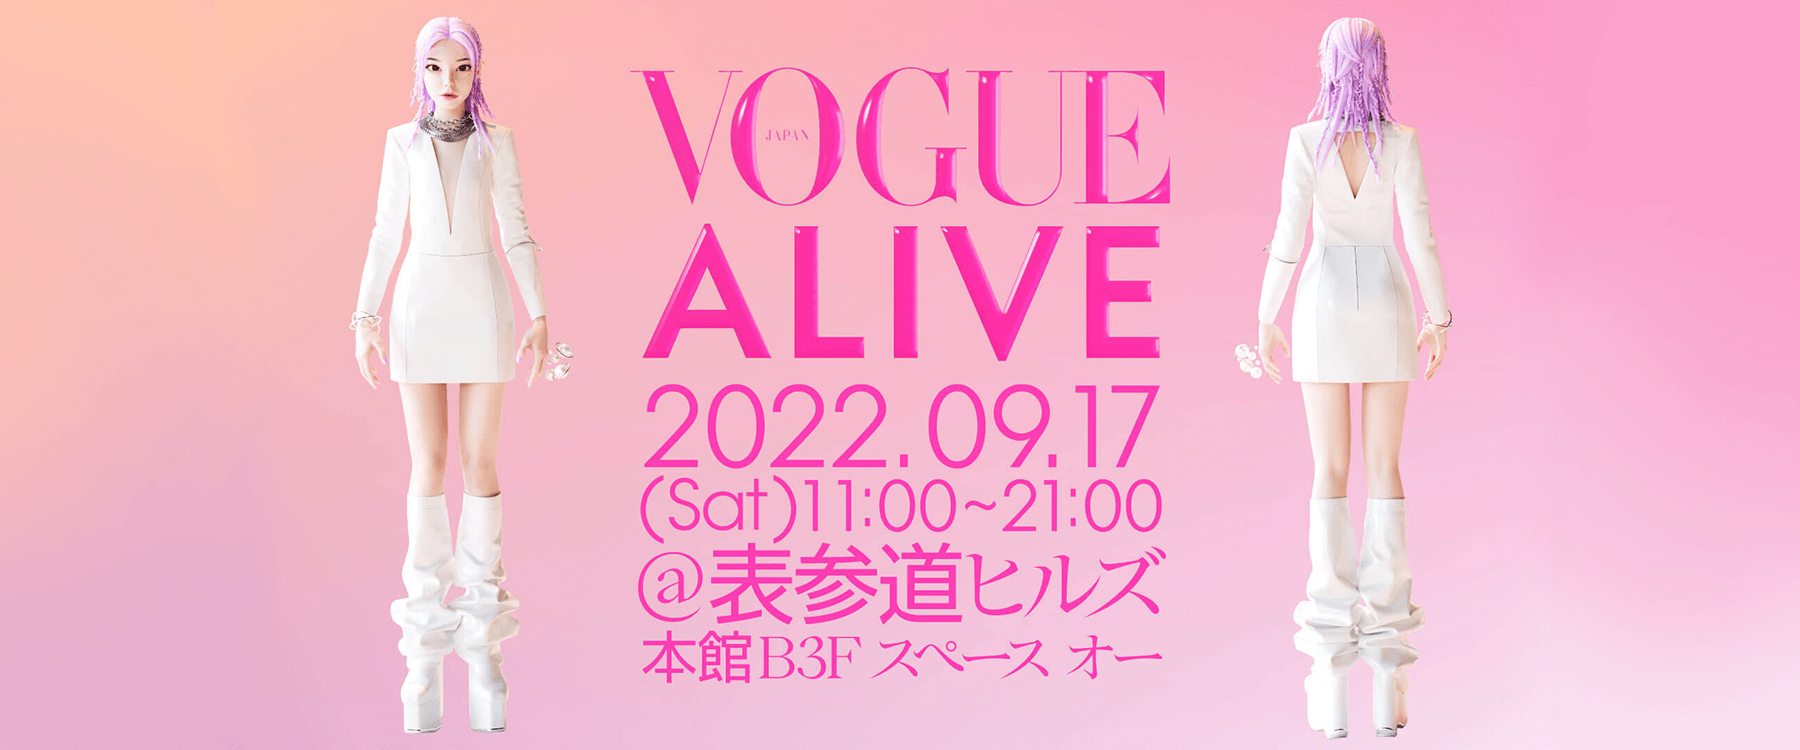 Smartpay is a sponsor for VOGUE ALIVE - "Vogue Japan 3.0" celebrating its launch with a one-day event. 